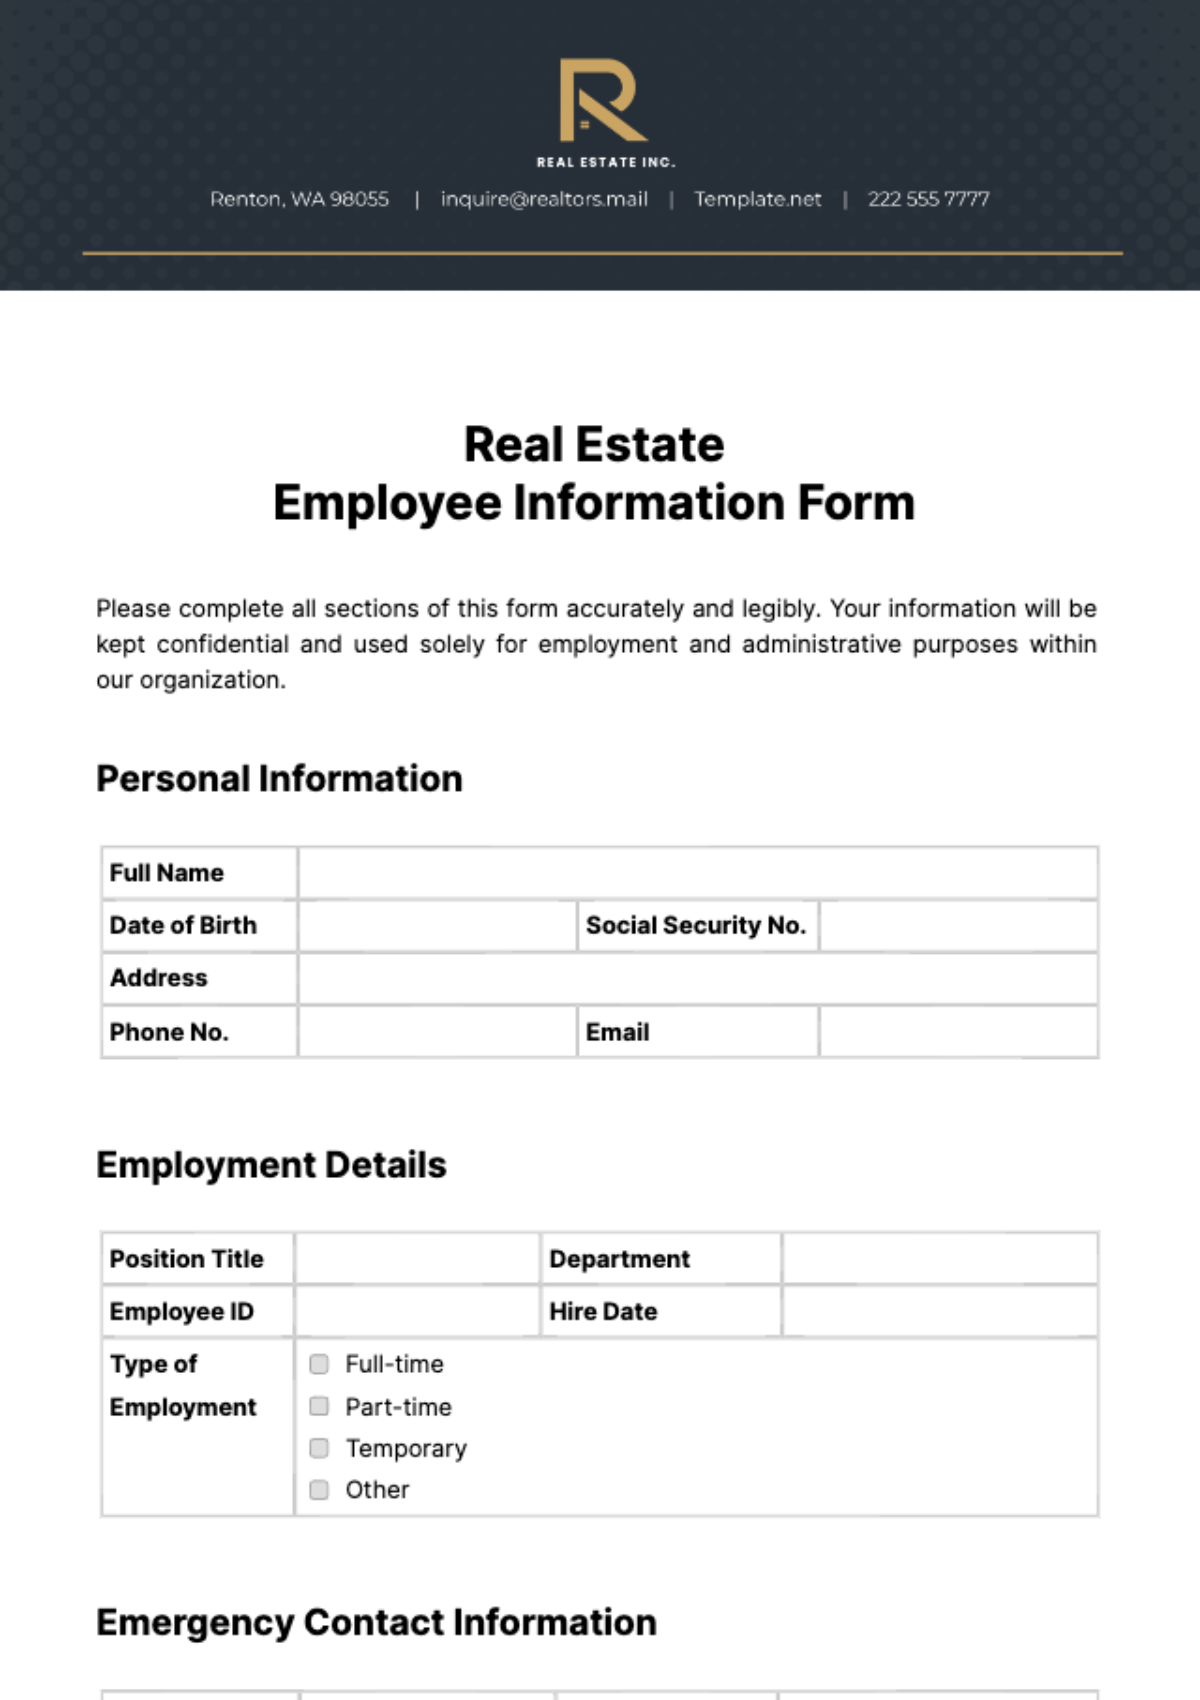 Real Estate Employee Information Form Template